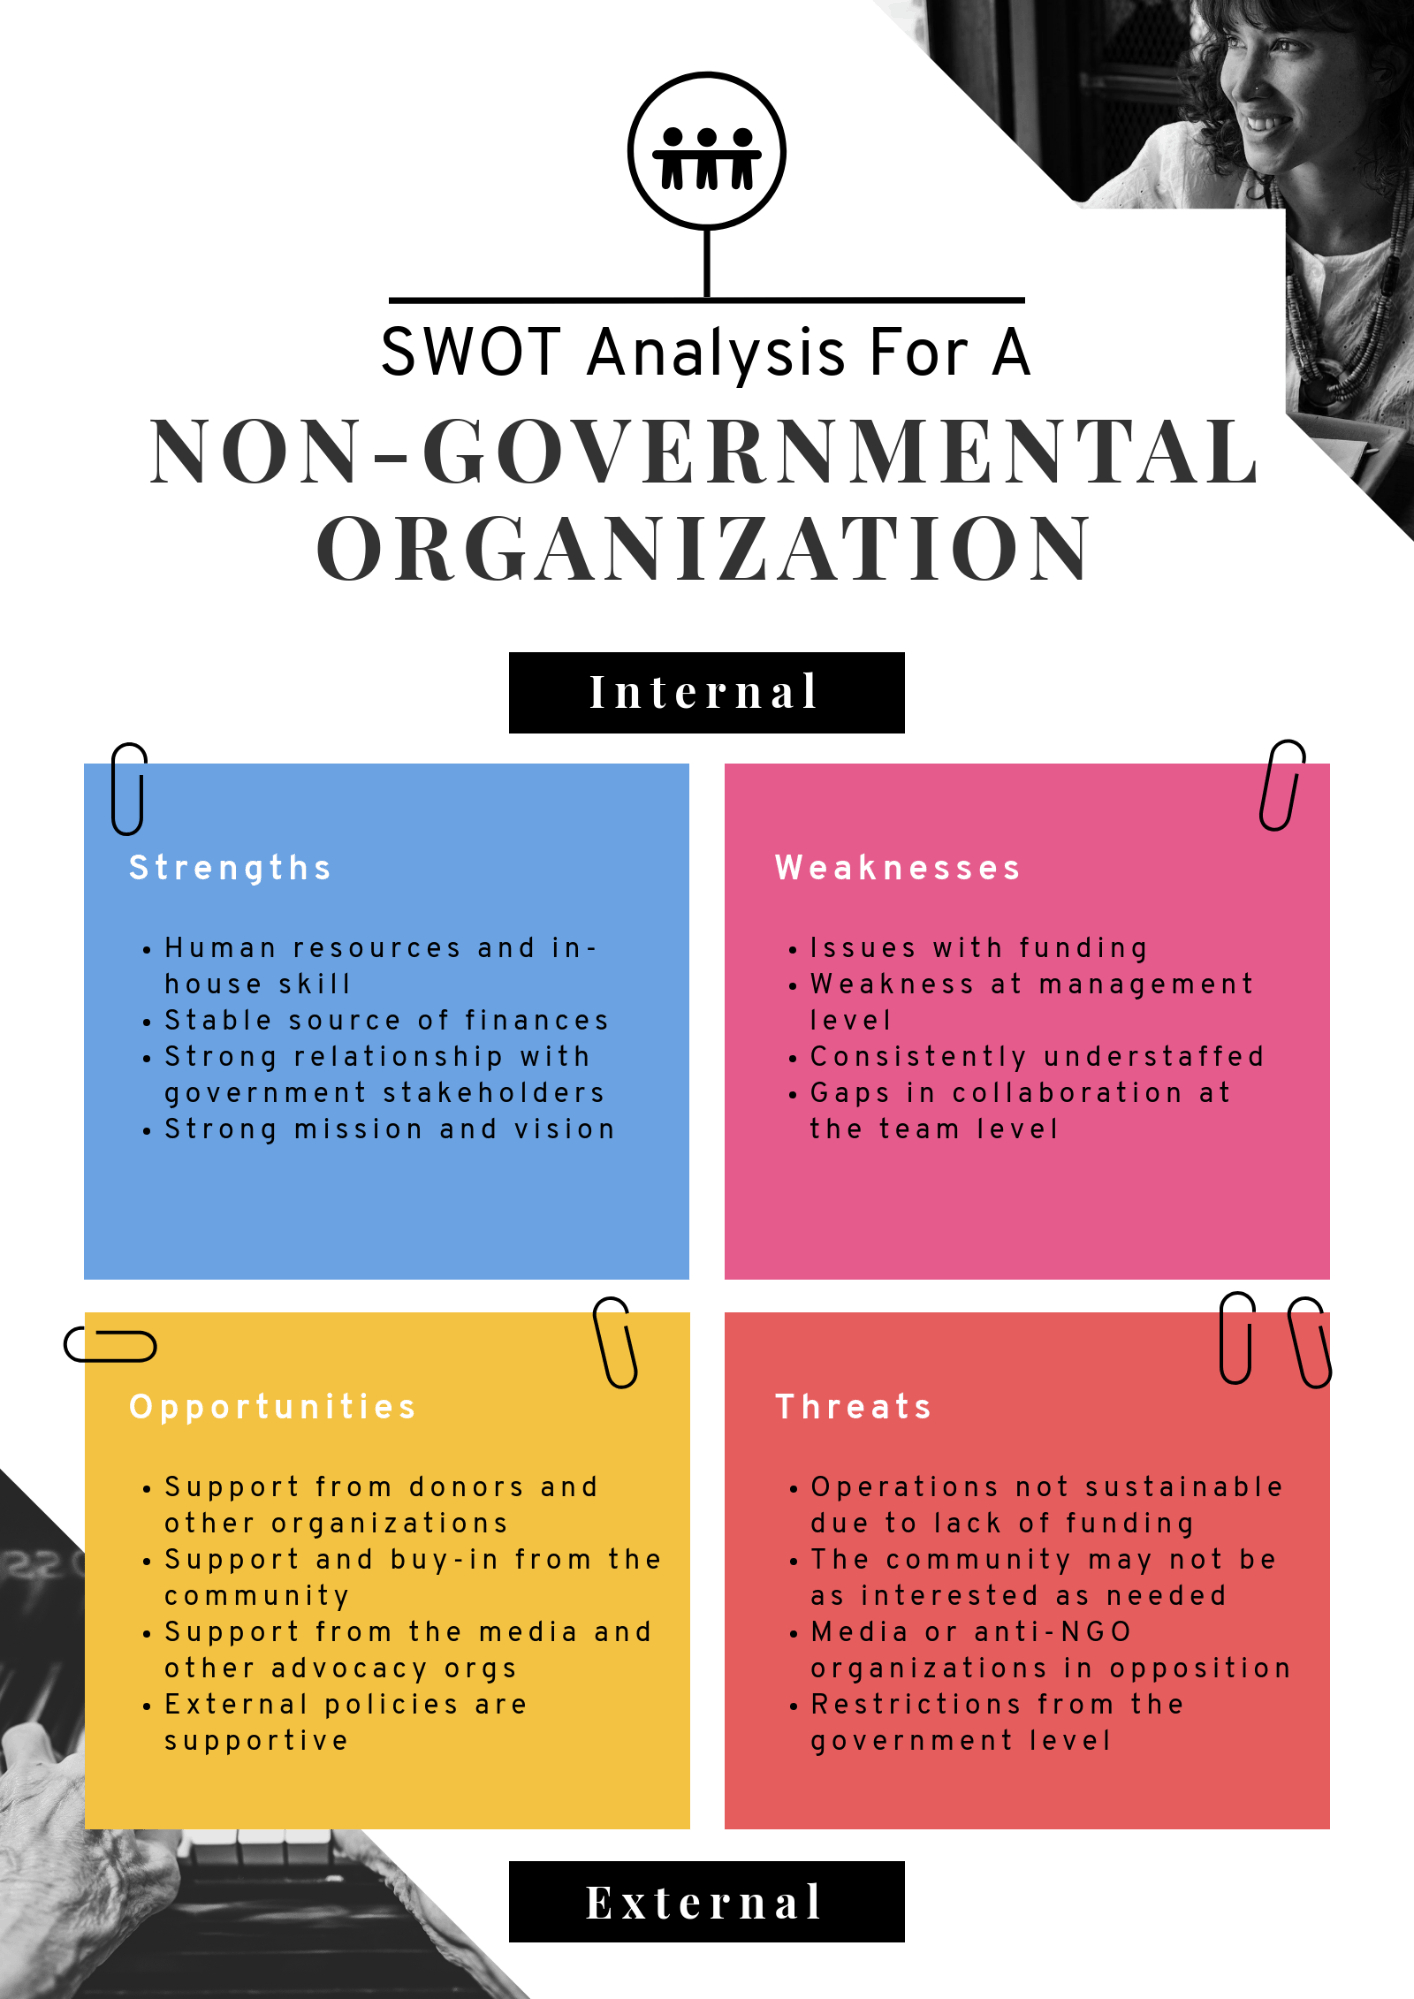 Swot Analysis: How To Structure And Visualize It | Piktochart In Strategic Analysis Report Template